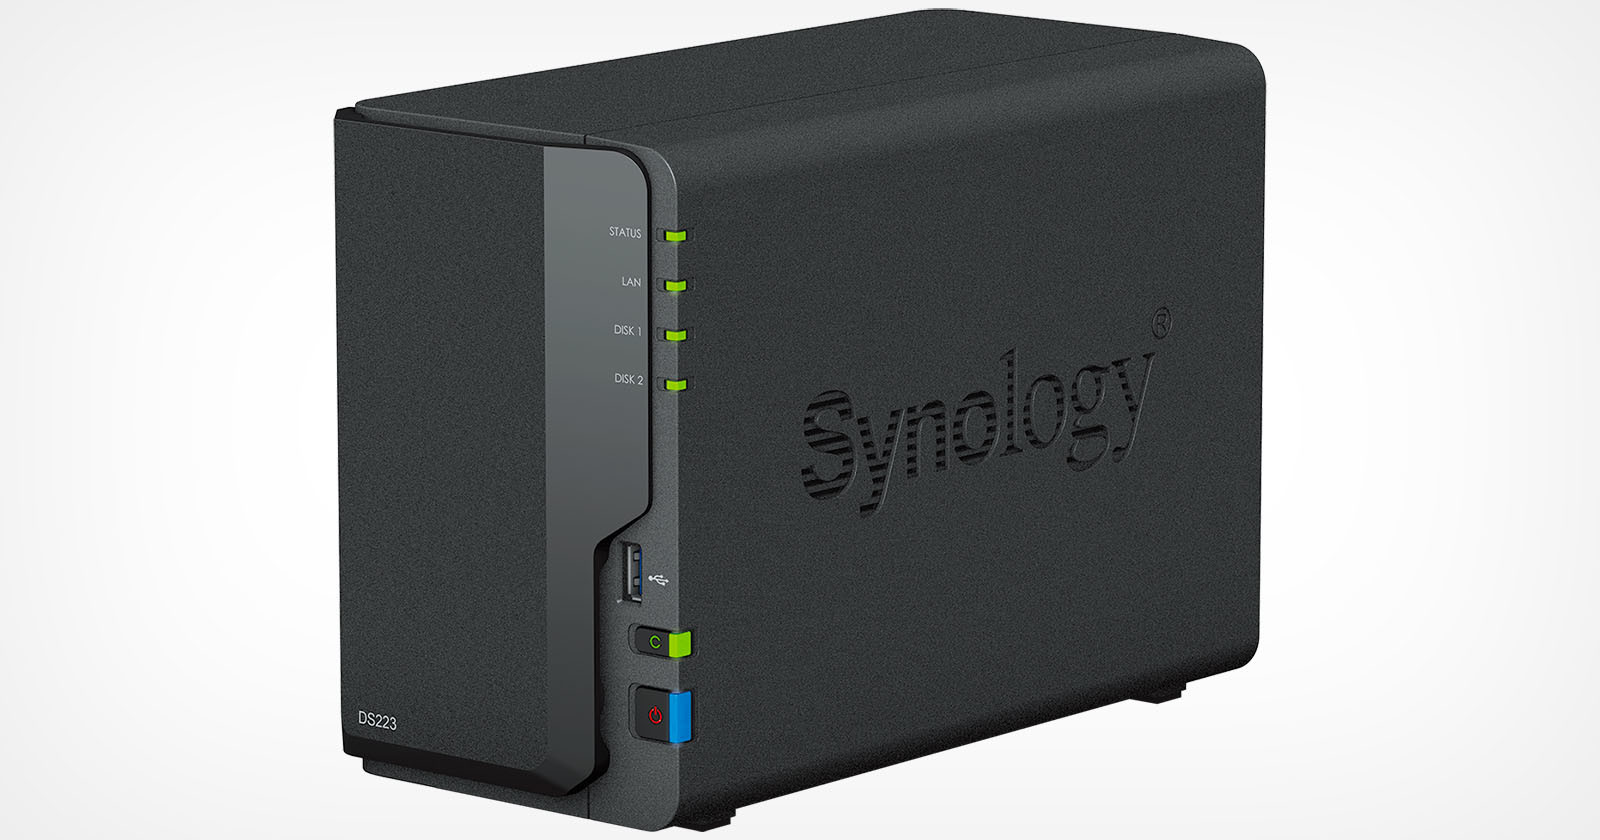  synology 2-bay ds223 nas promises simple data 